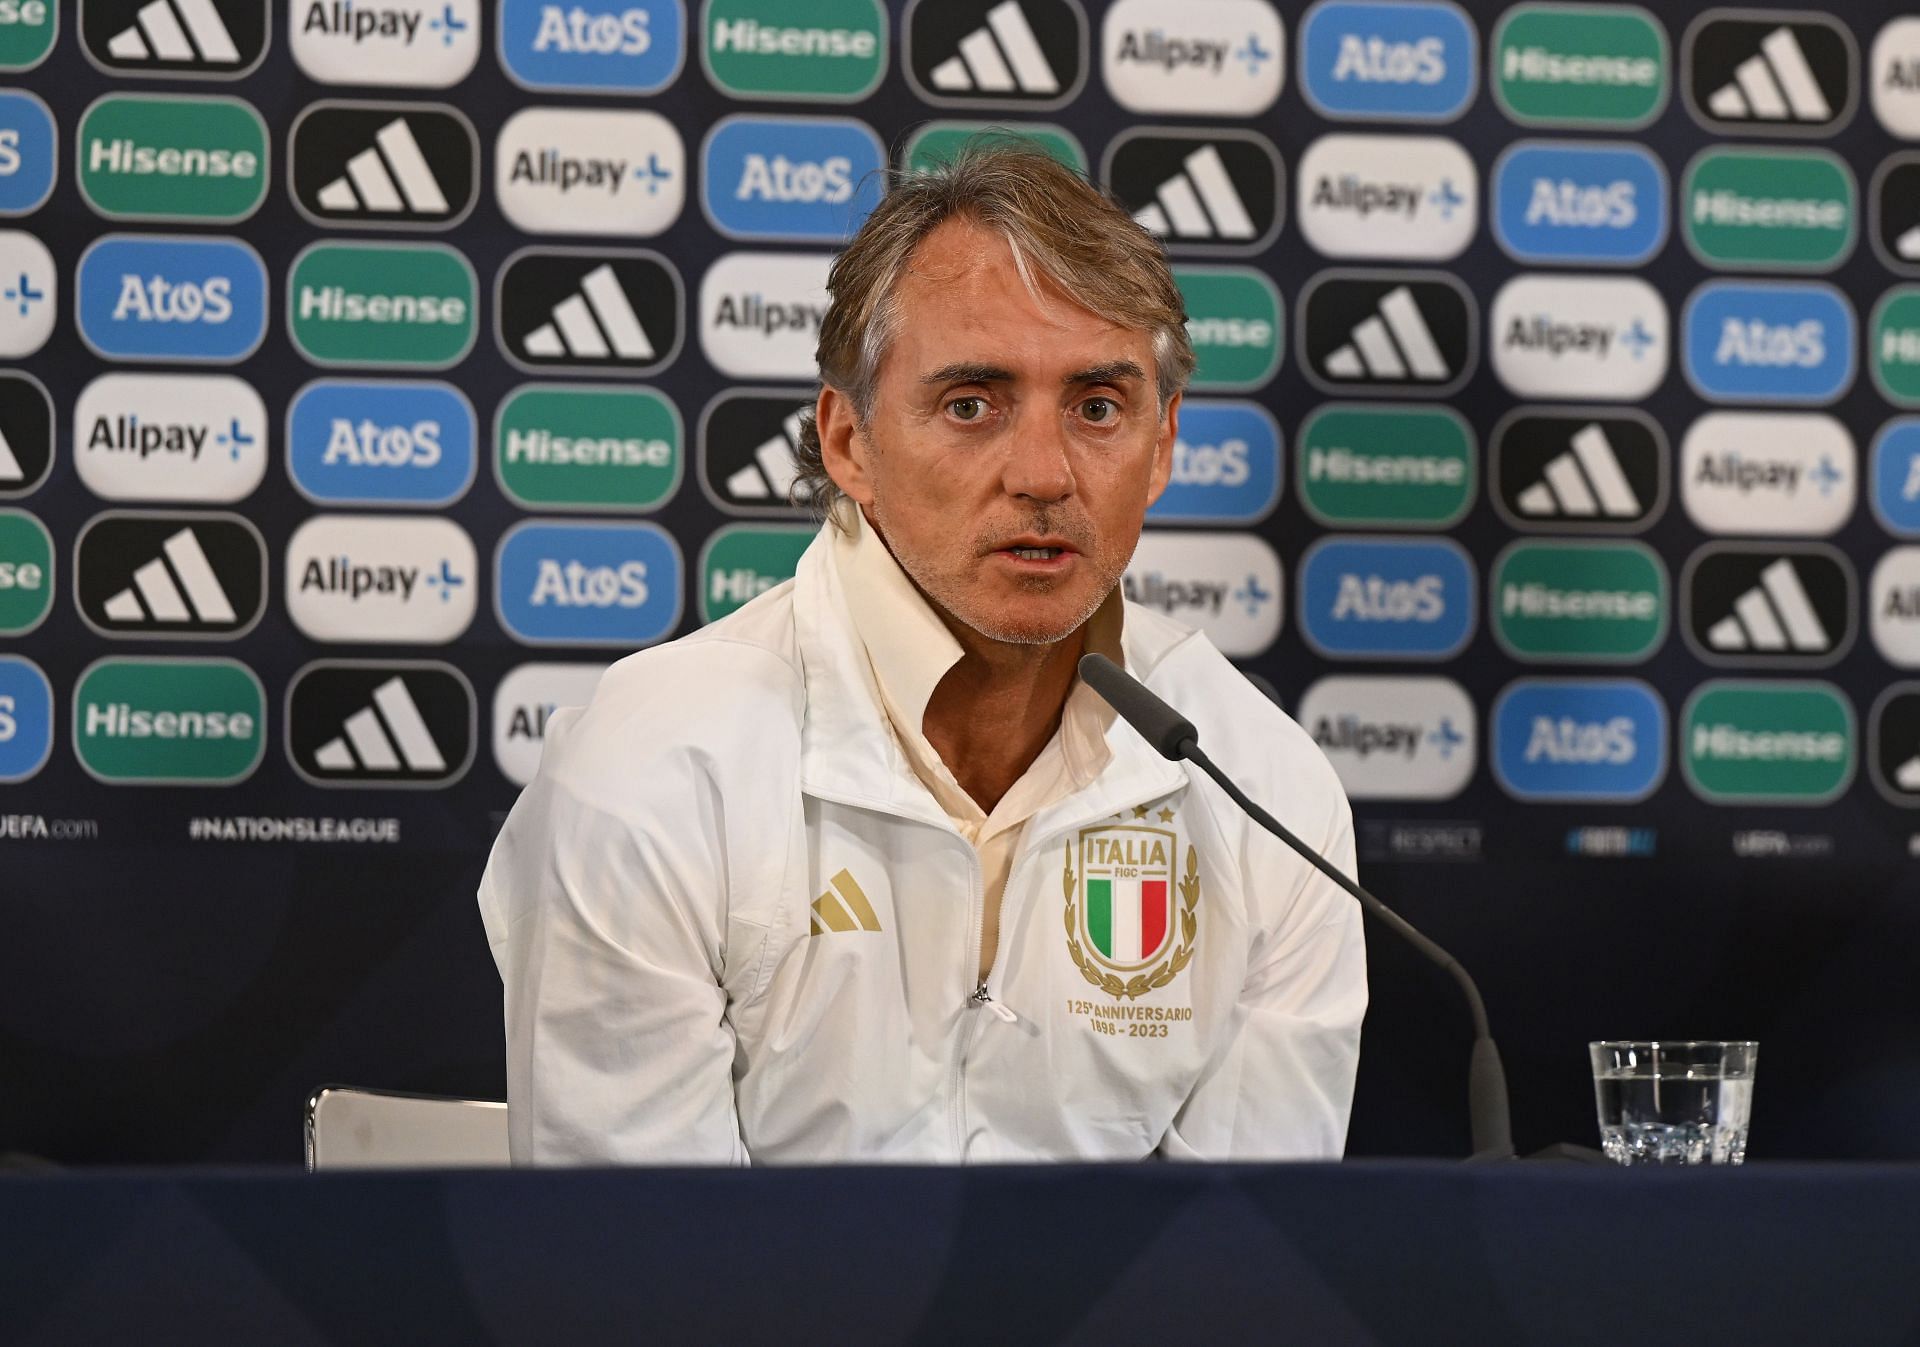 Gli Azzurri are looking to win their first Nations League.